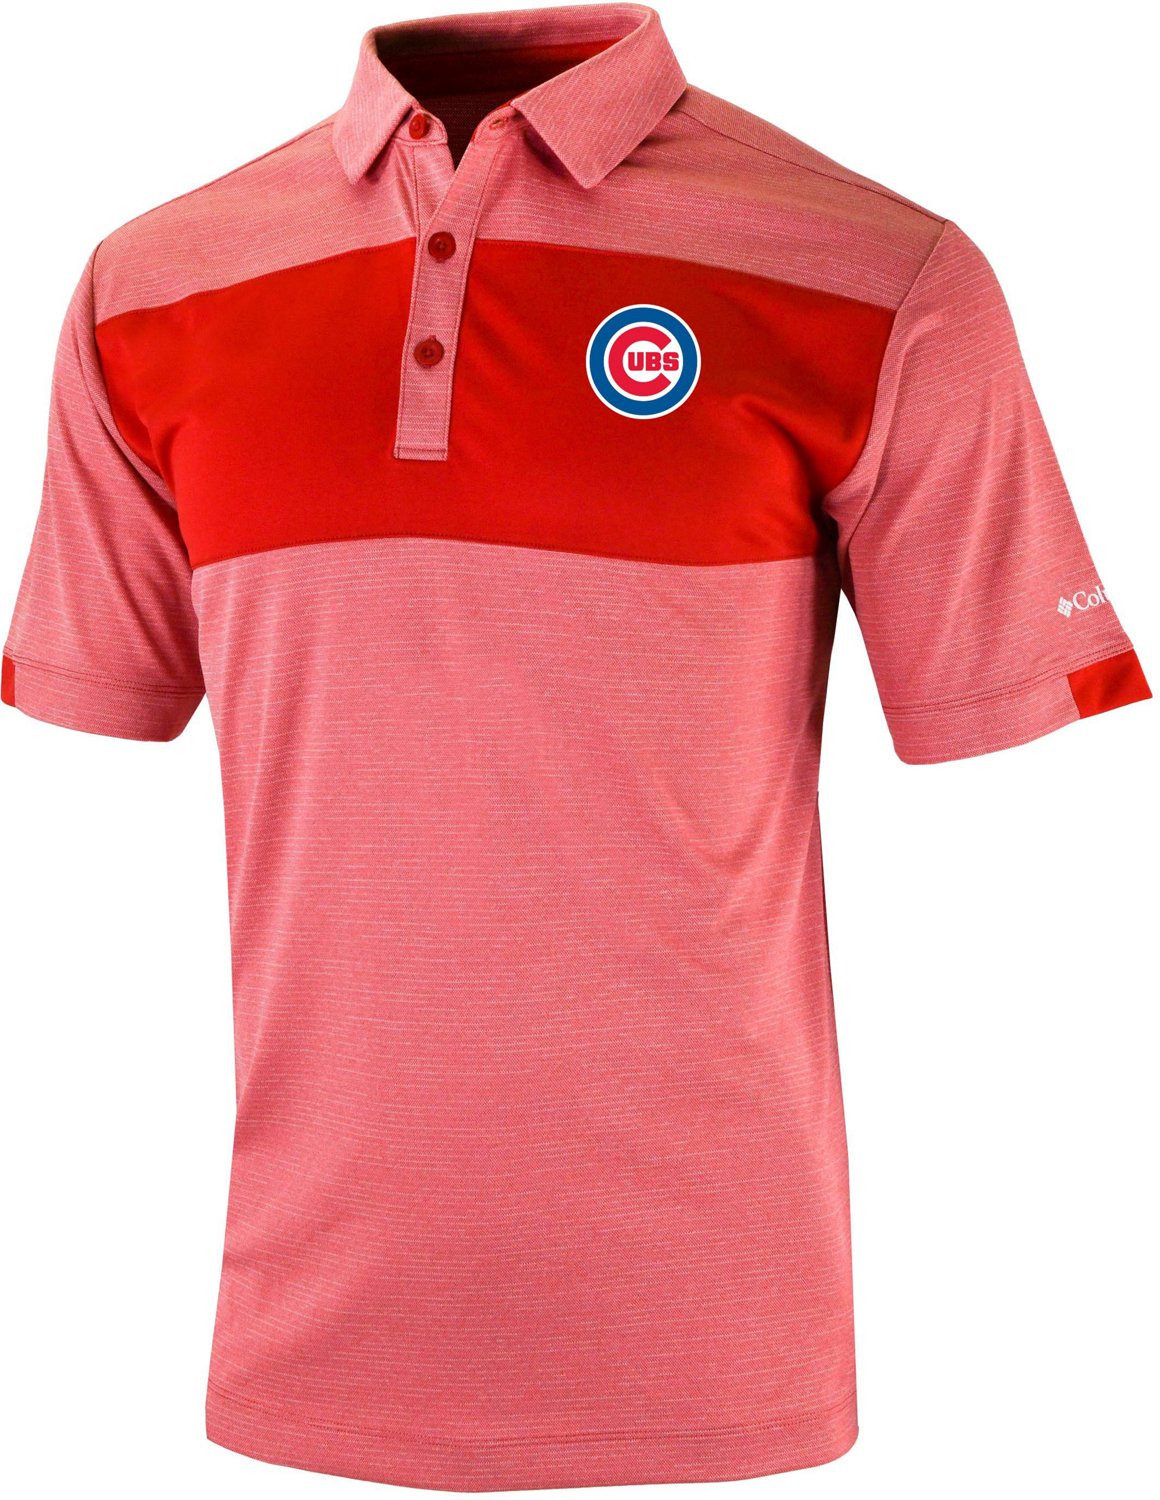 Columbia Sportswear Men's Chicago Cubs Total Control Polo